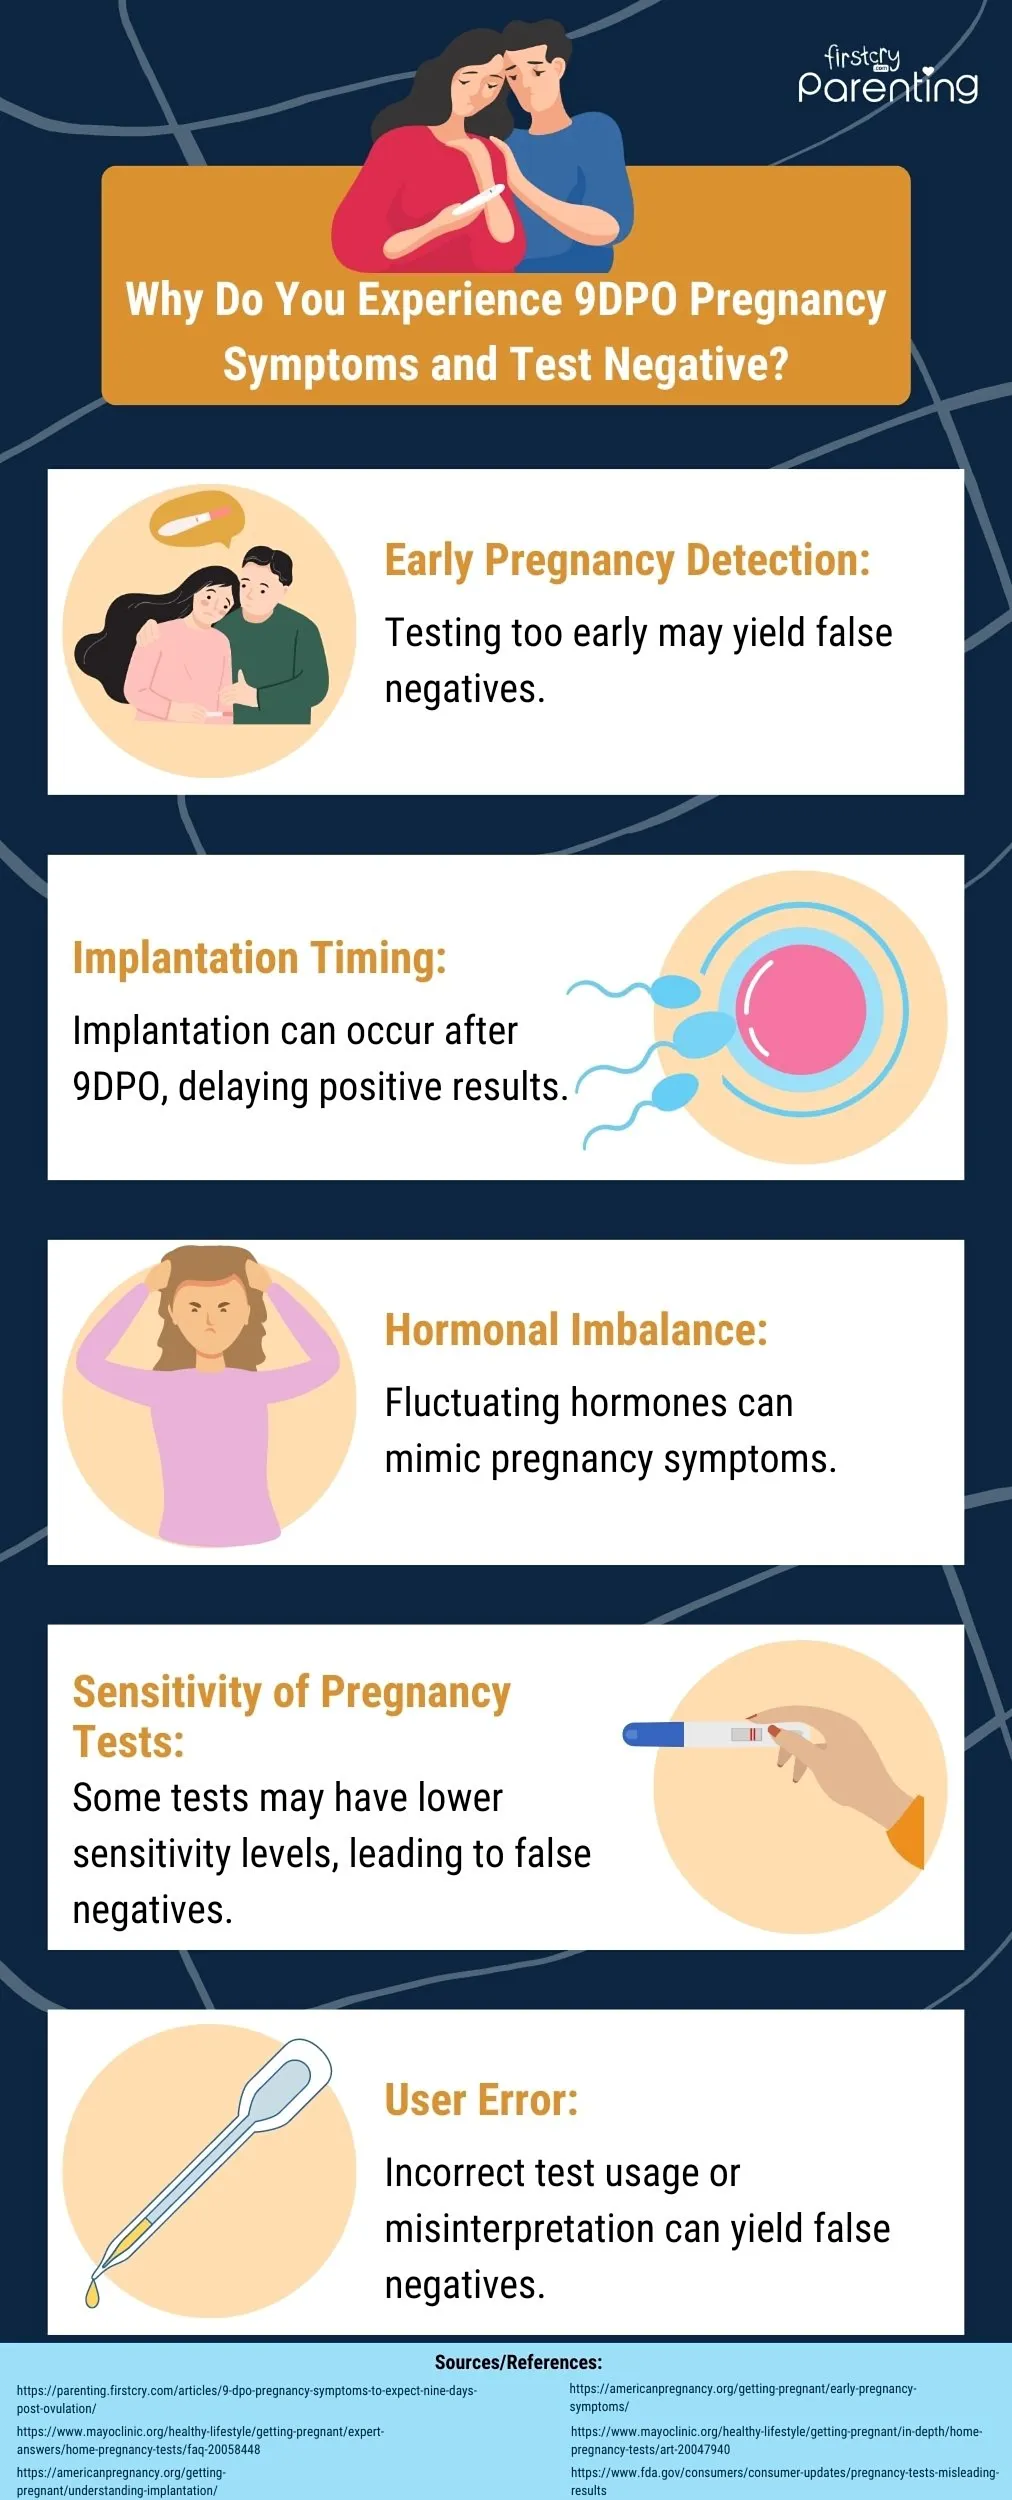 Let's Get Real: How Early On Do Pregnancy Symptoms Start?